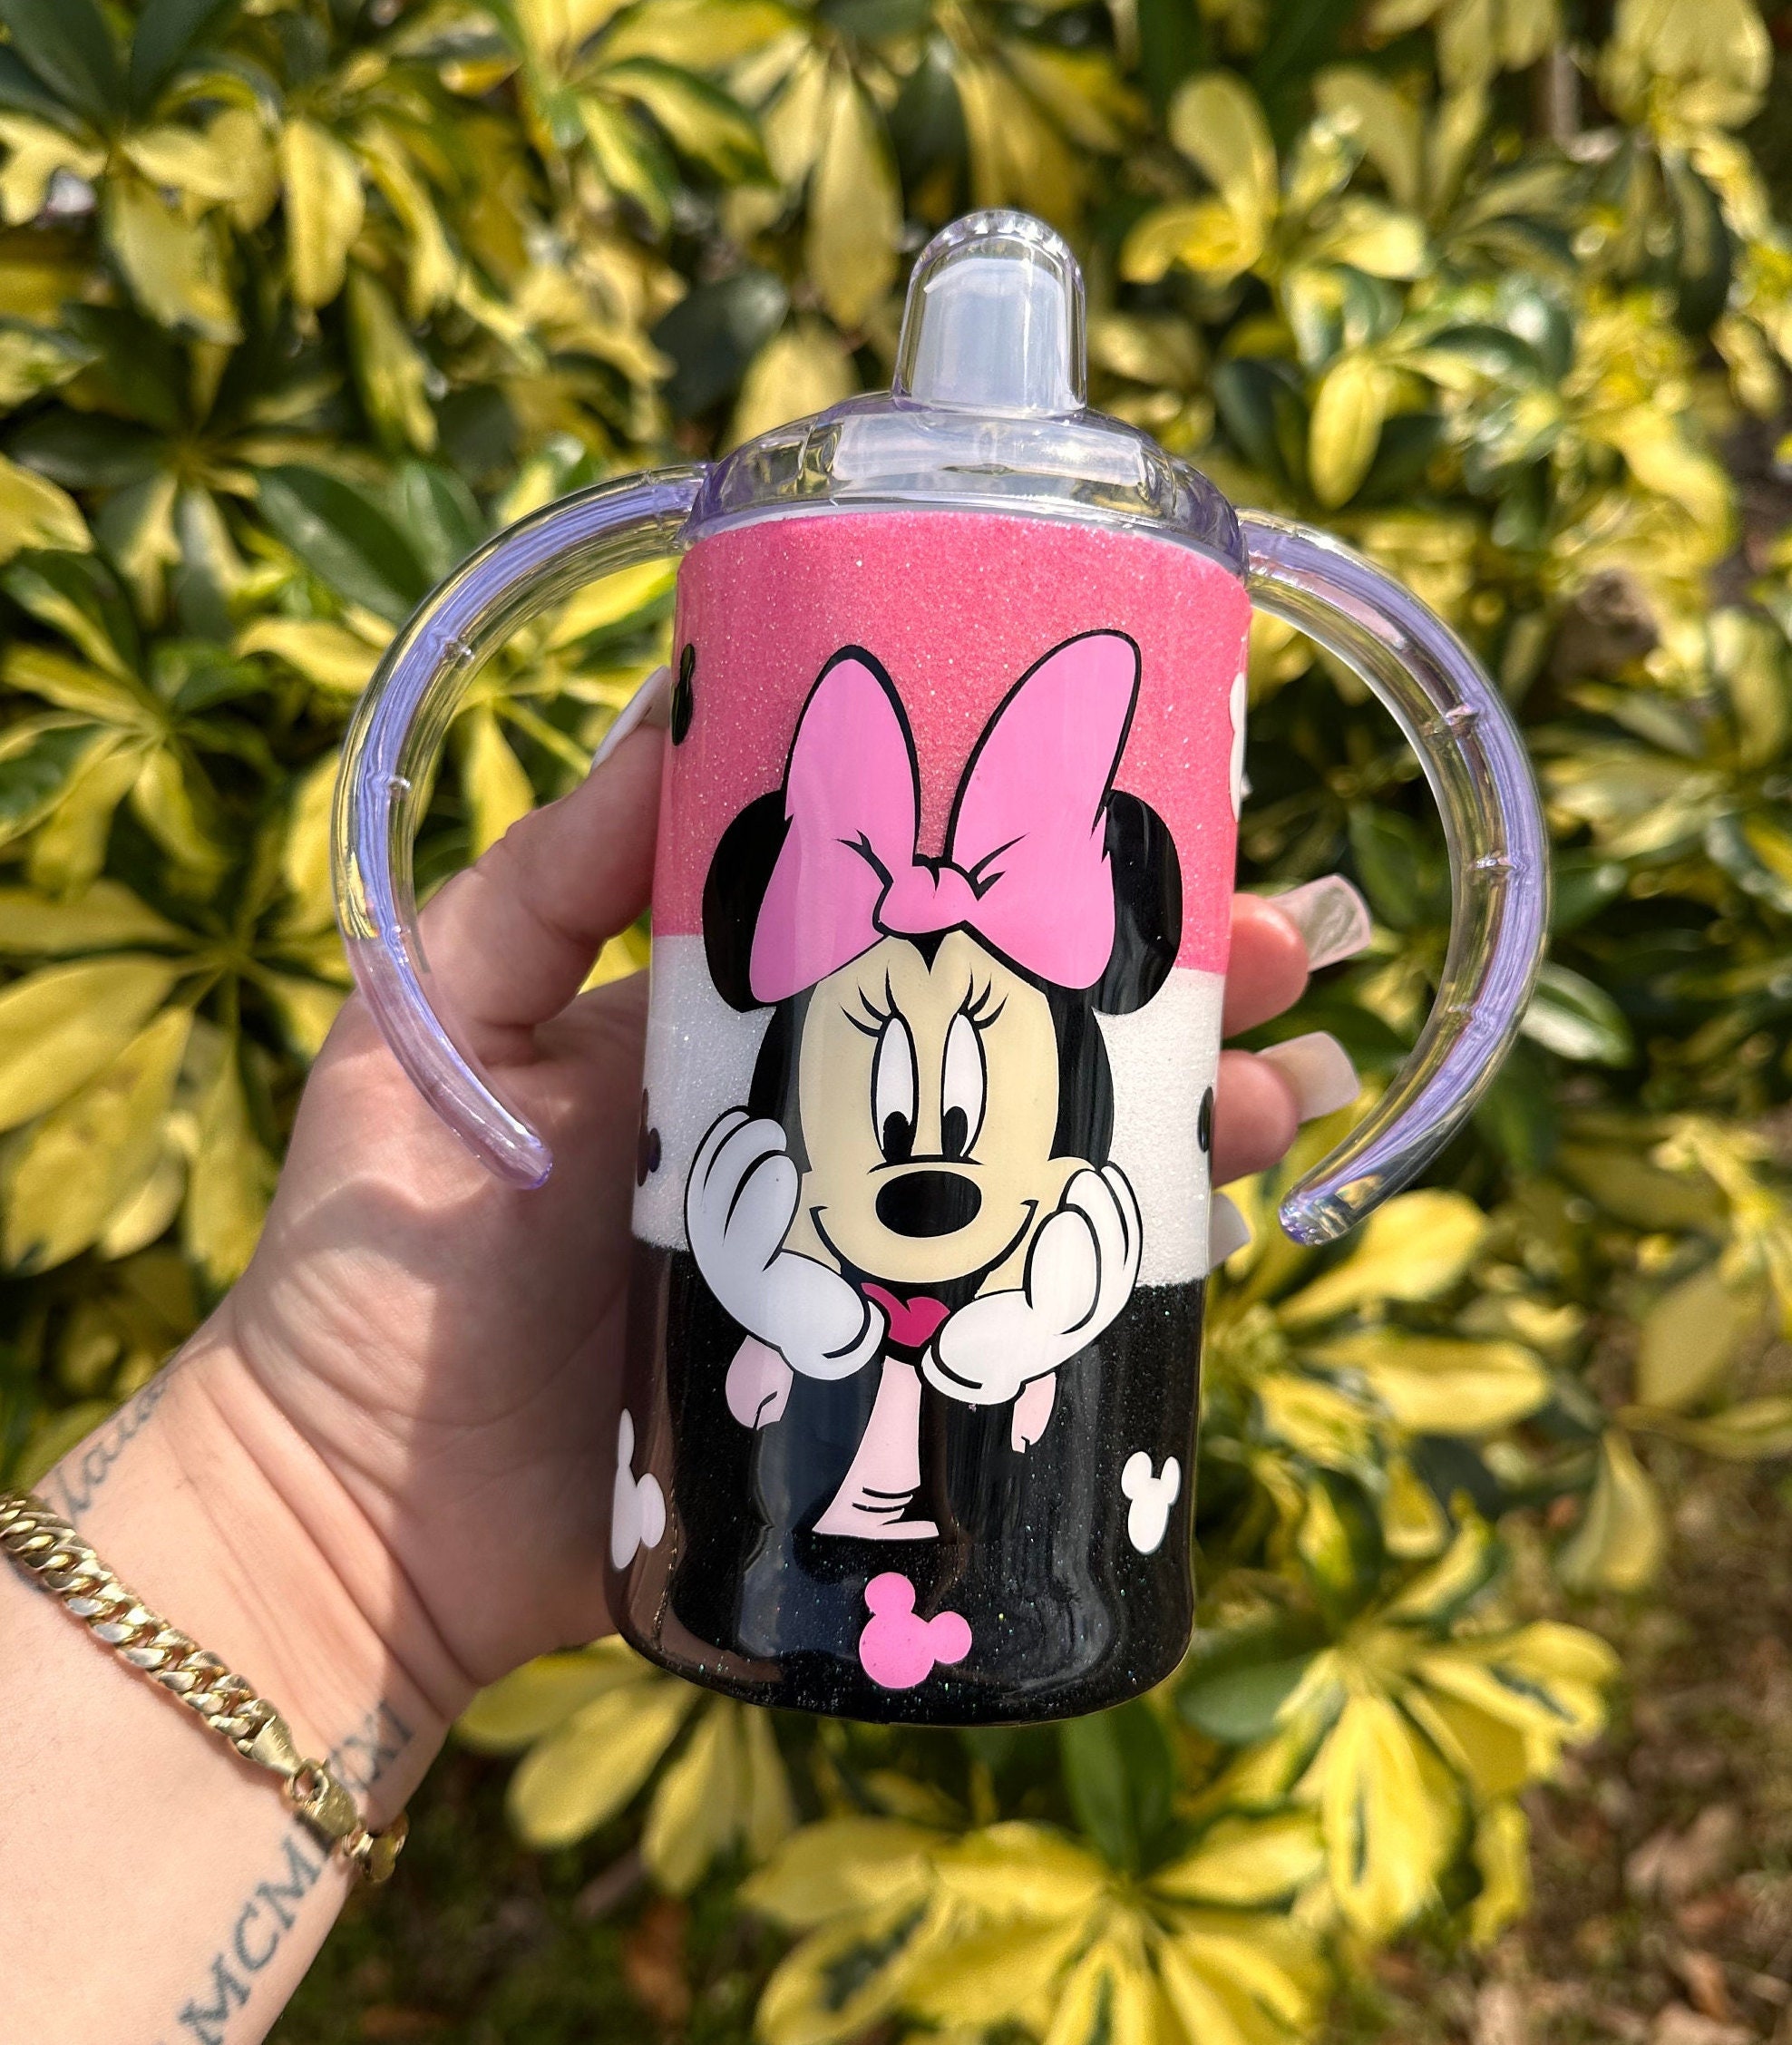 Disney Minnie Mouse Spill-Proof Weighted Straw Sippy Cup - pink/multi, one  size